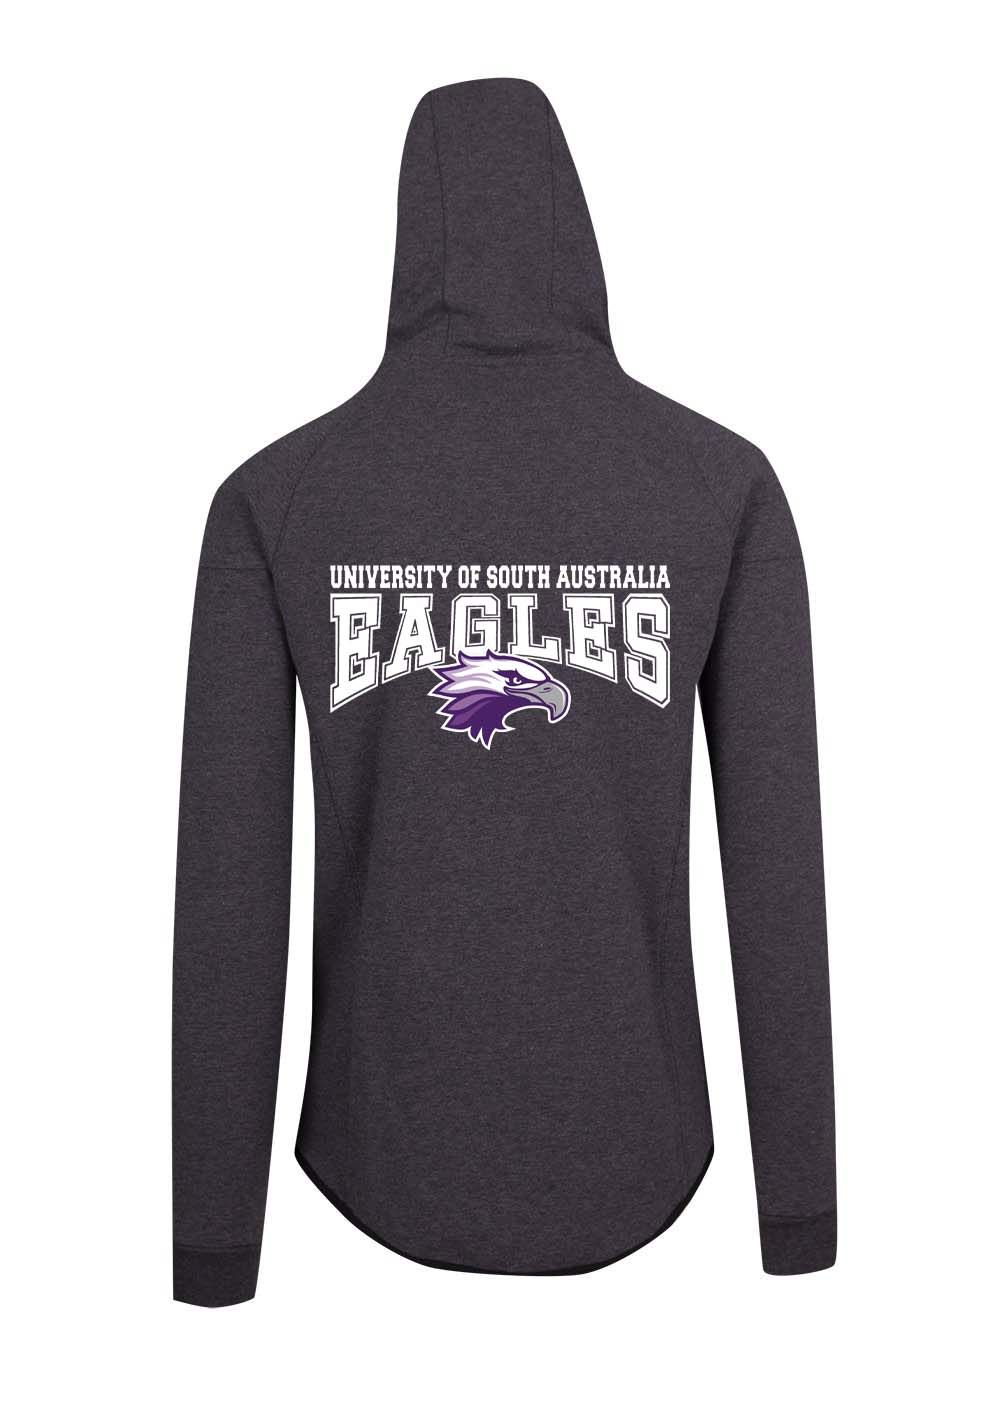 UNISA Eagle Curved Polar Fleece with personalized number on front